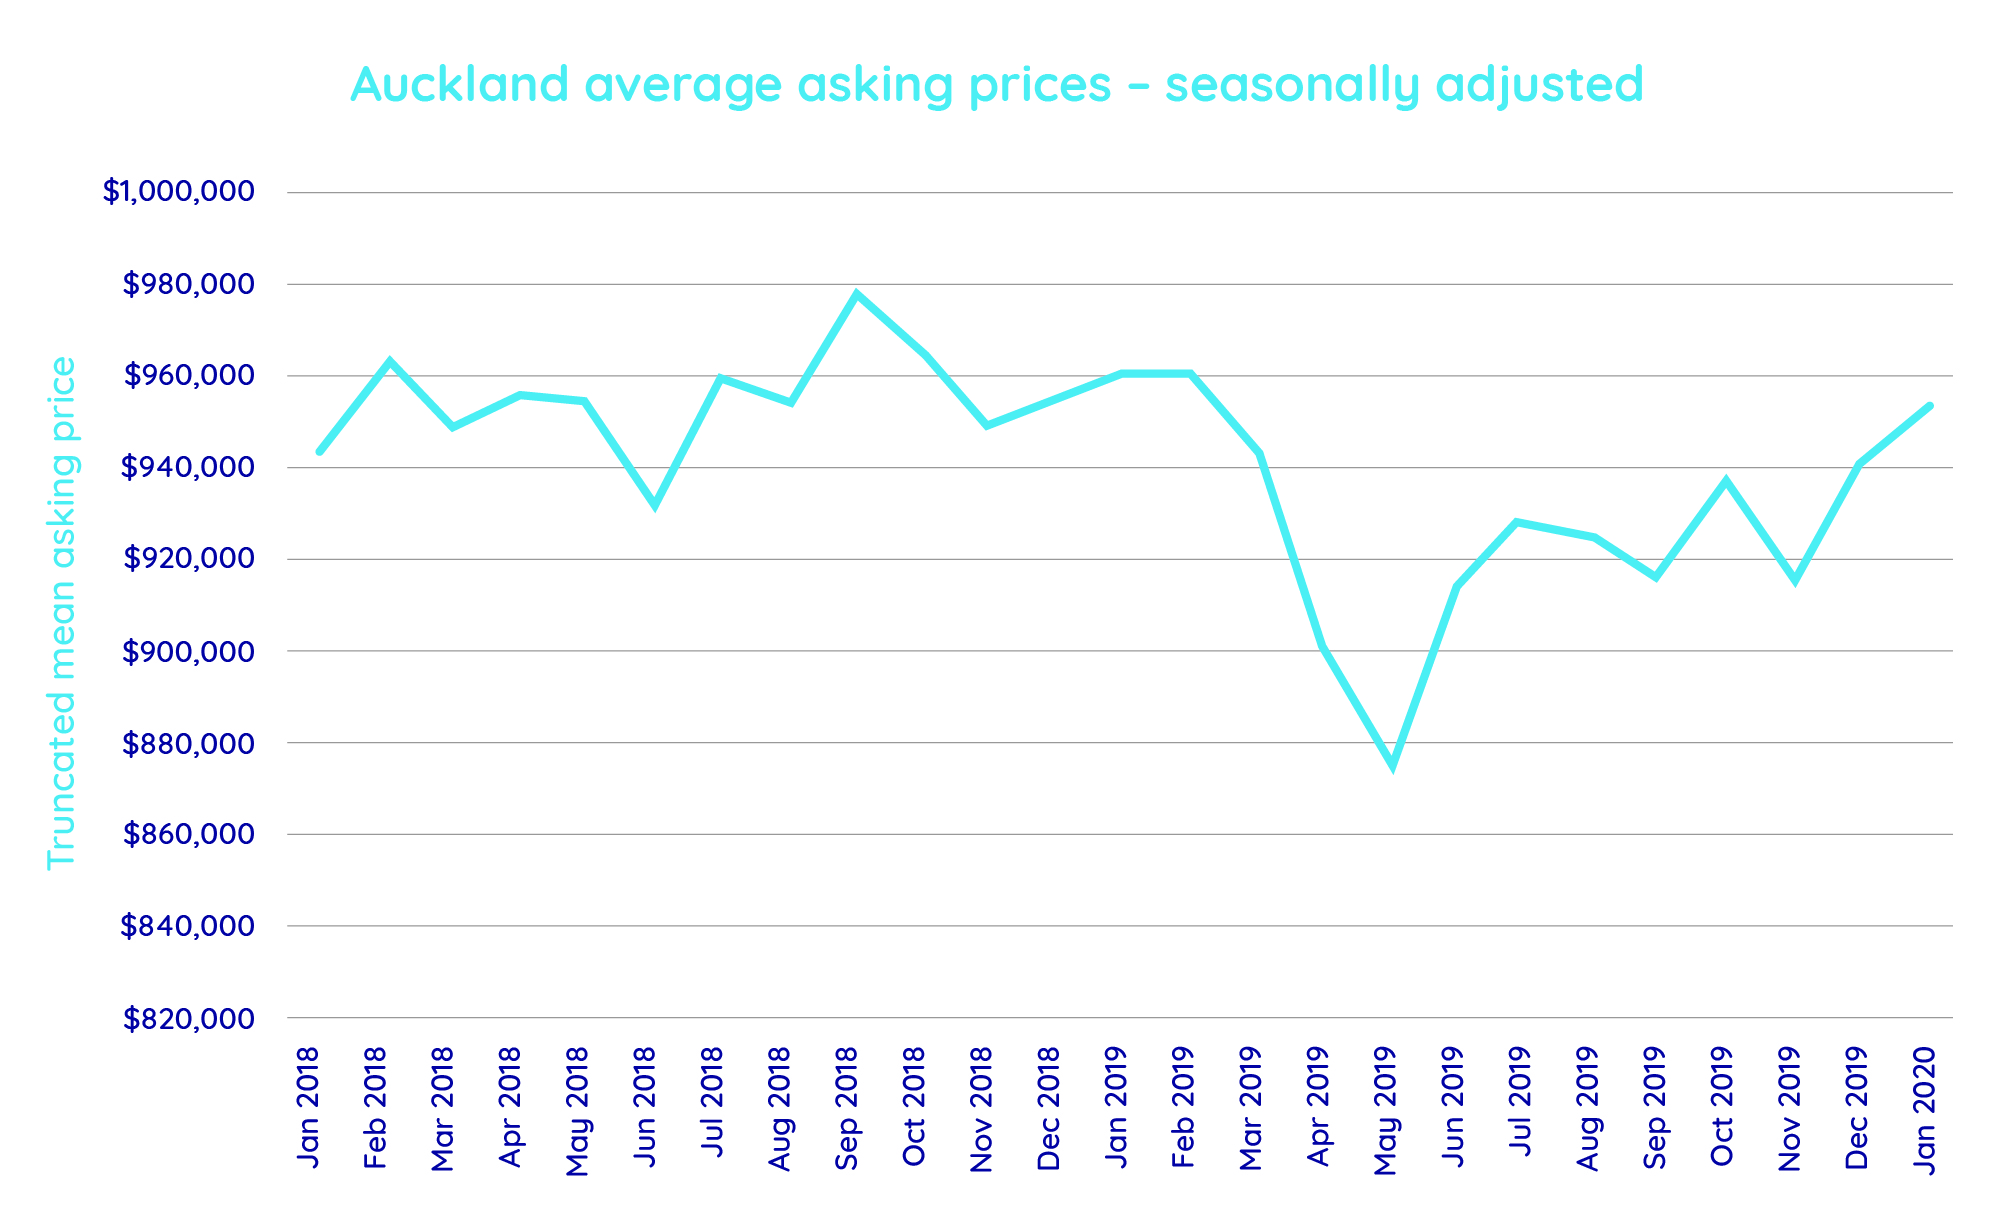 Auckland's average asking prices